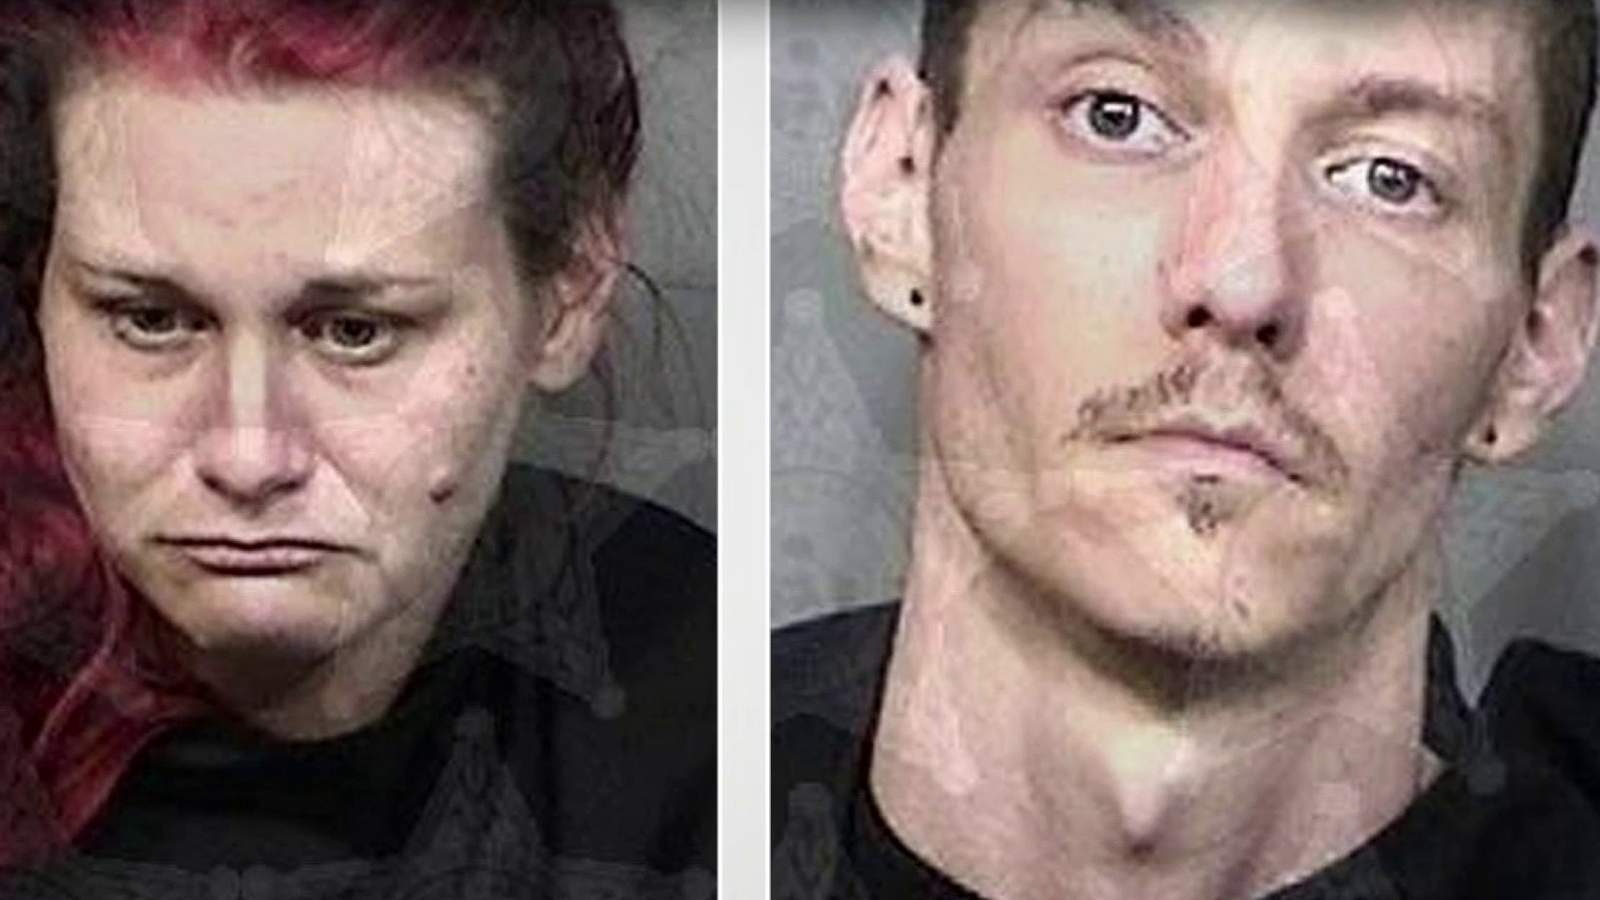 Titusville mother, boyfriend arrested after 1-year-old drowns in pool, officers say